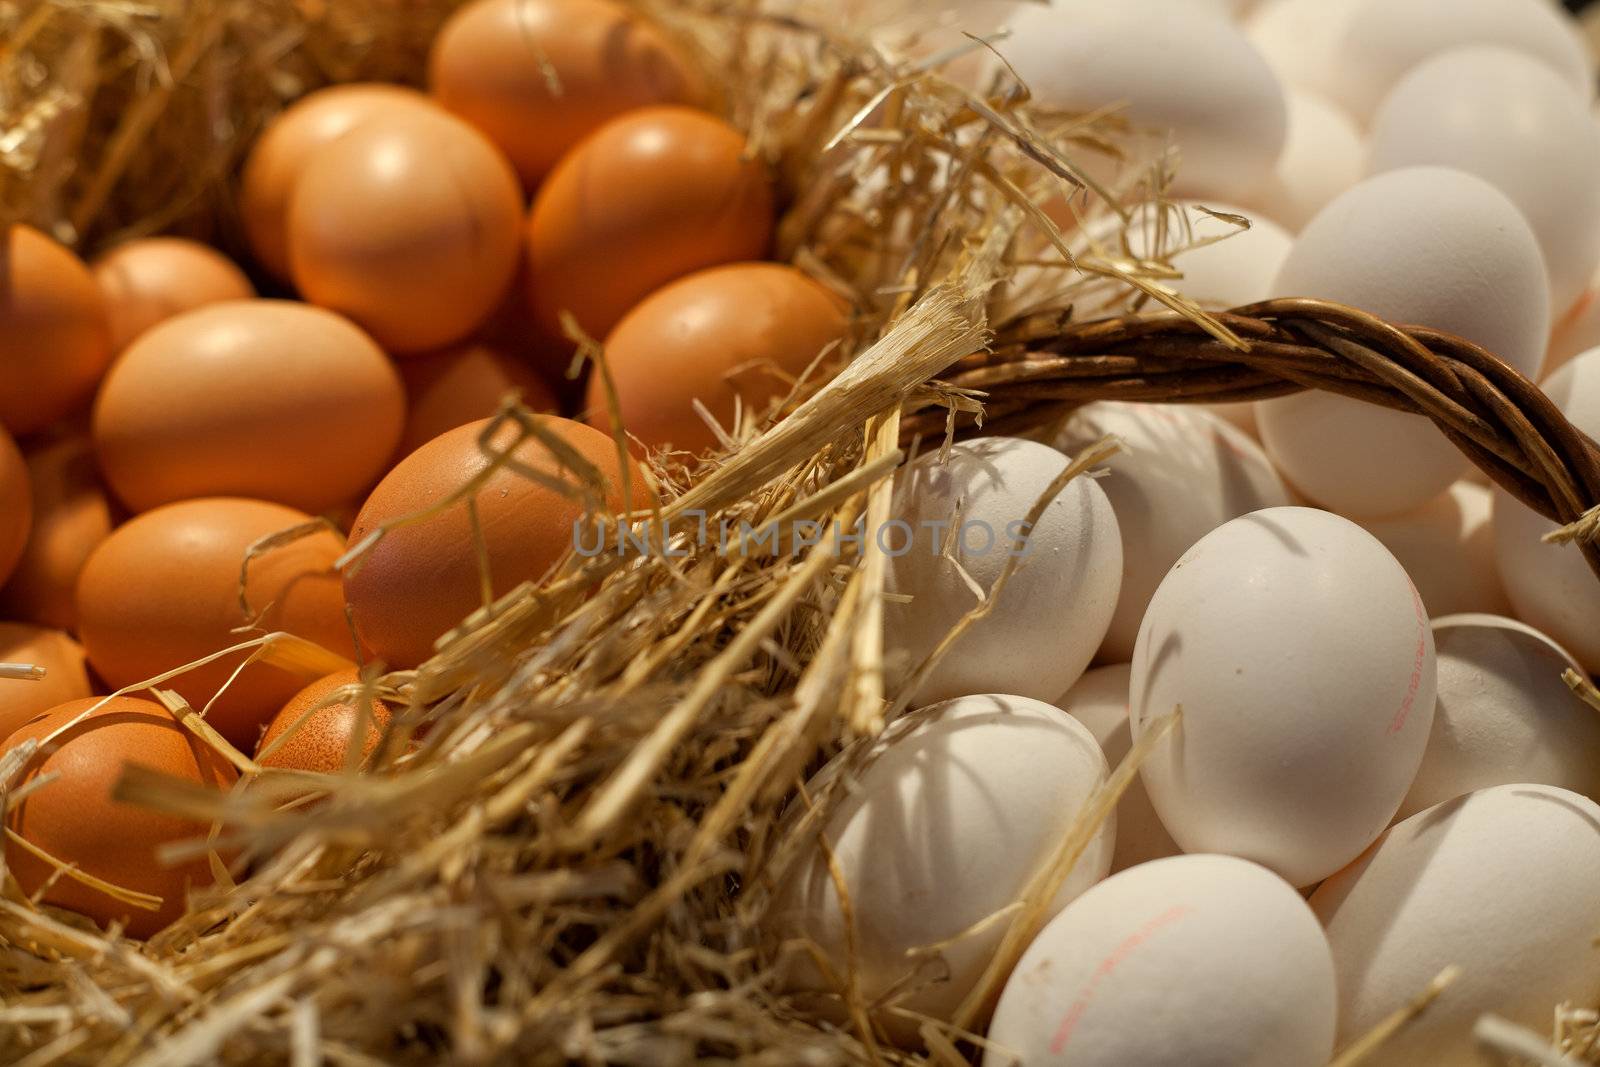 Brown and white eggs on a straw background.